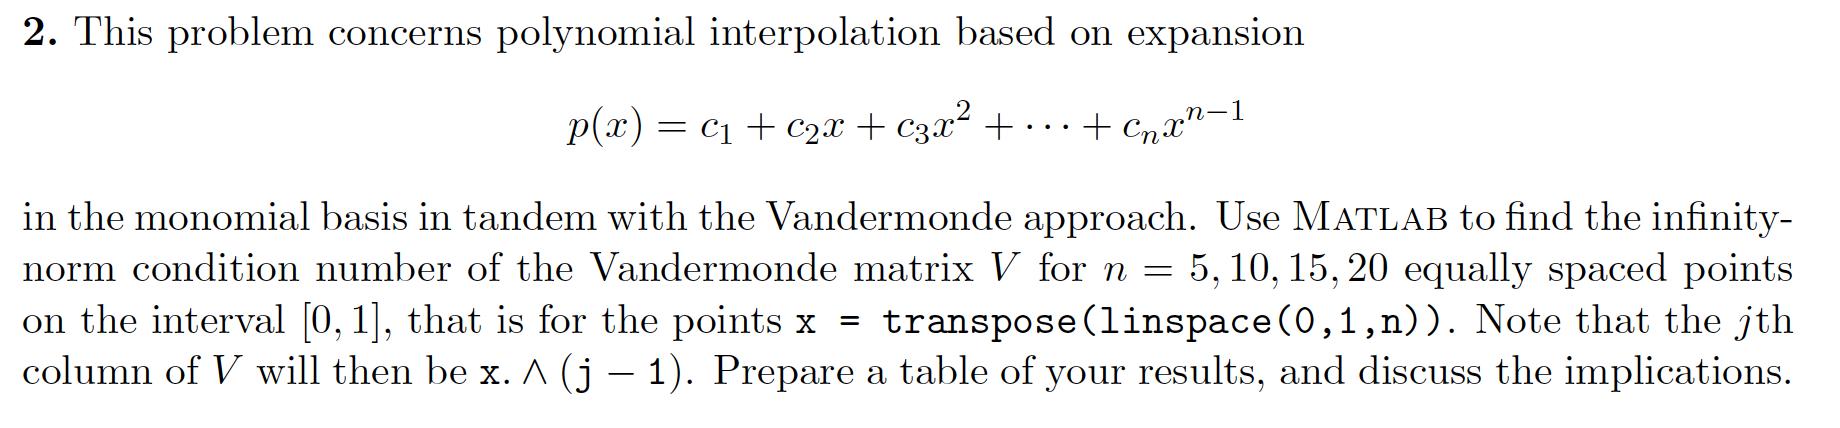 2. This problem concerns polynomial interpolation based on expansion p(x) = C + cx + c3x + tin n n-1 in the